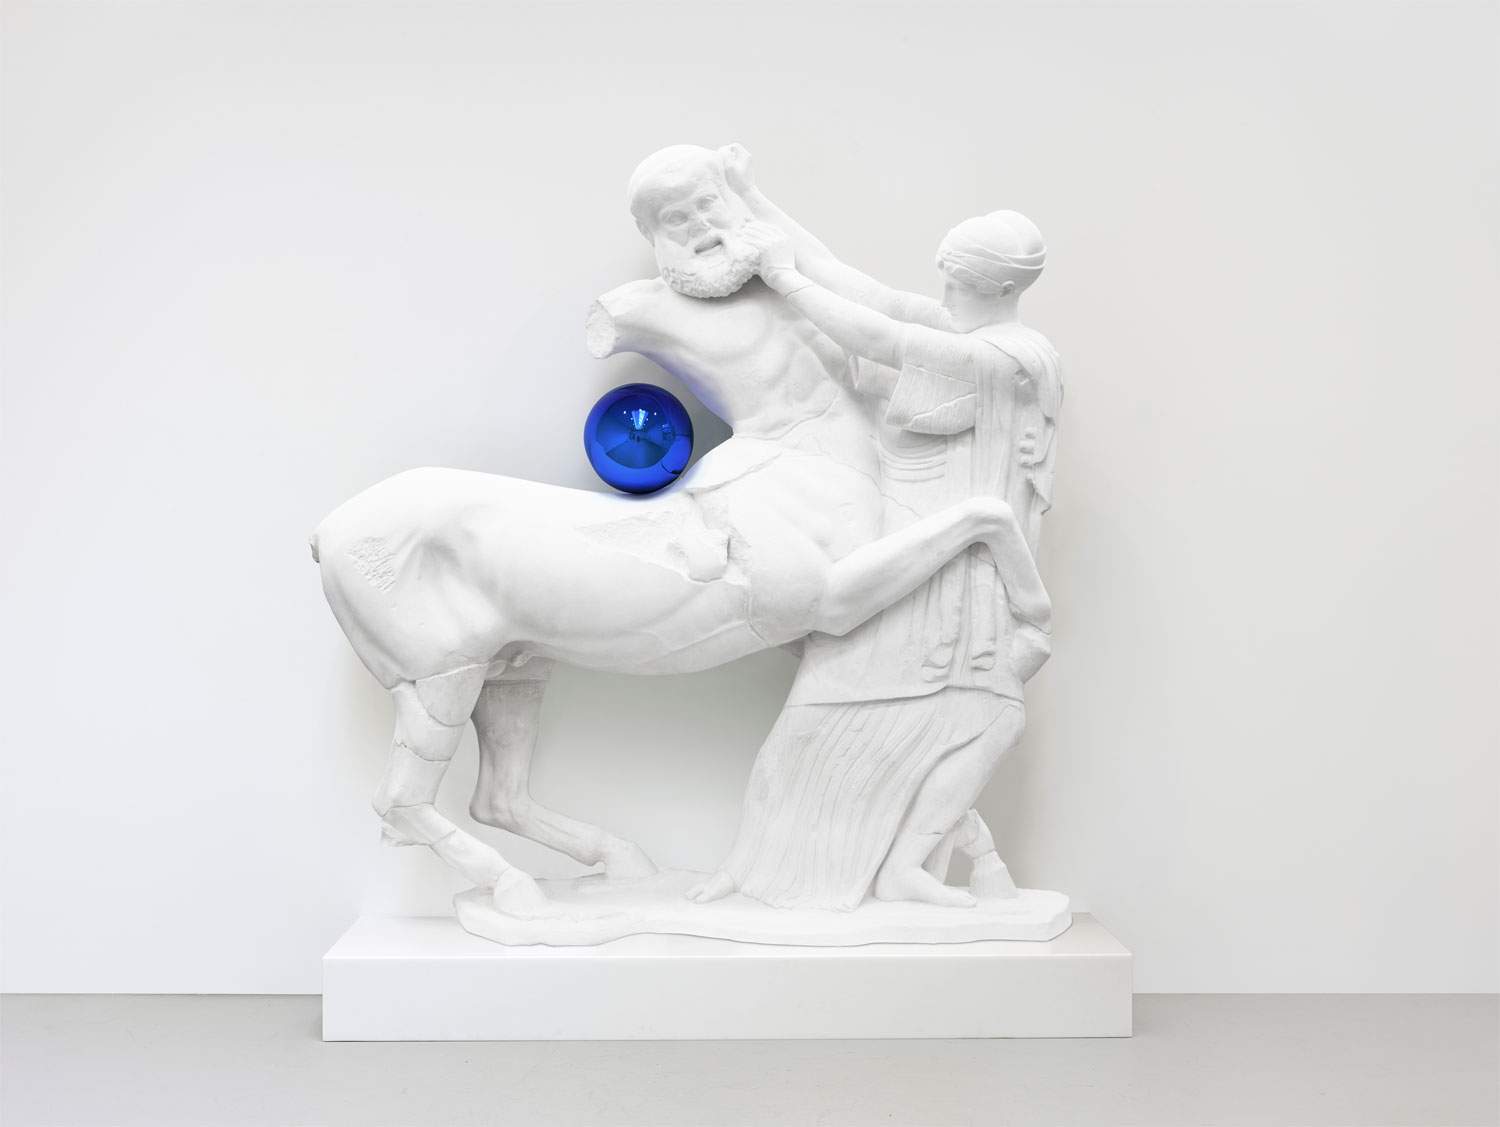 Milan, a large work by Jeff Koons at Gallerie d'Italia in Piazza Scala 